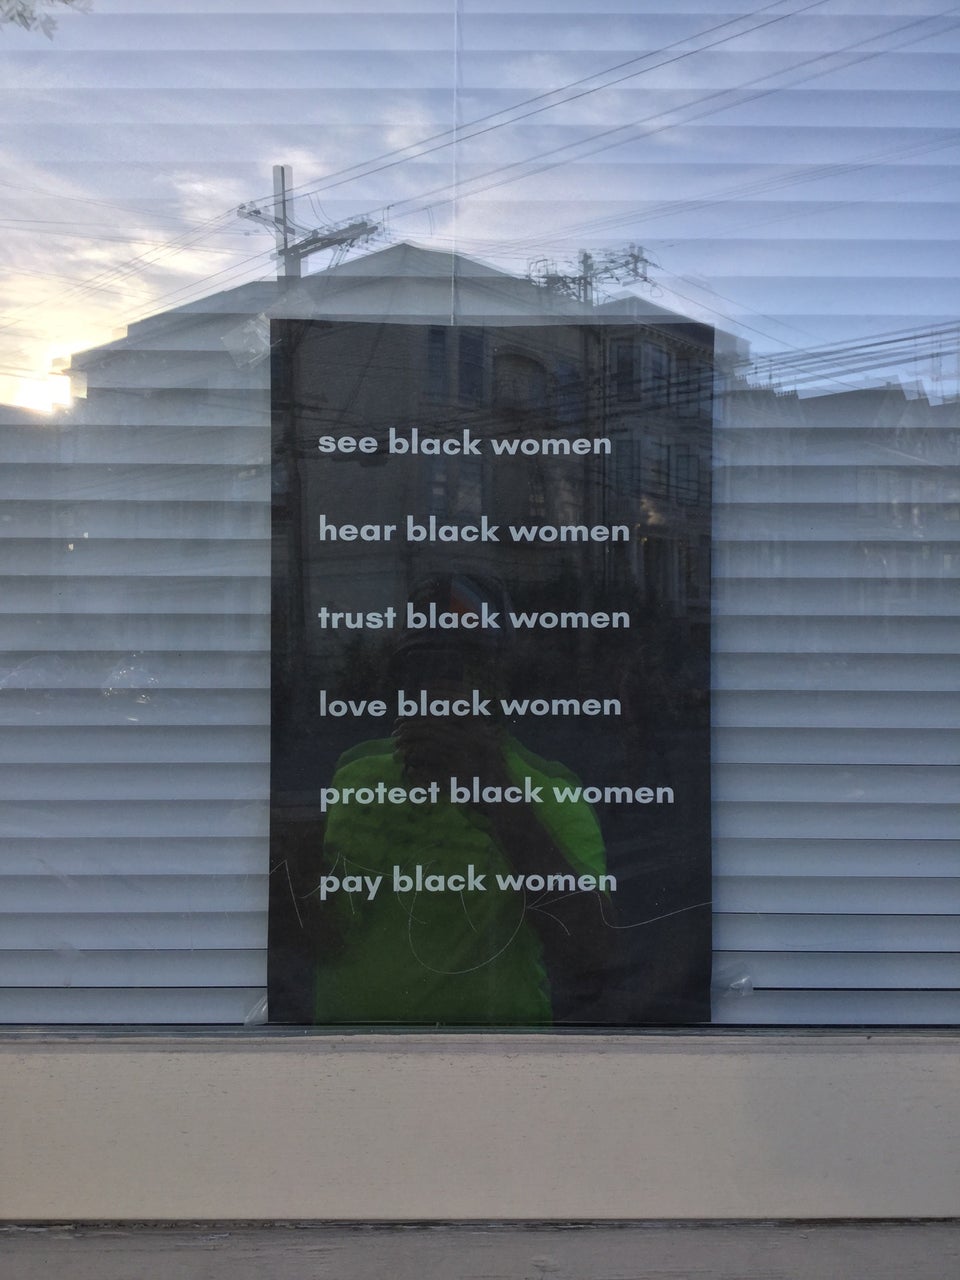 Black sign with white text in a window with white mini-blinds behind it, with six lines: see black women, hear black women, trust black women, love black women, protect black women, pay black women.